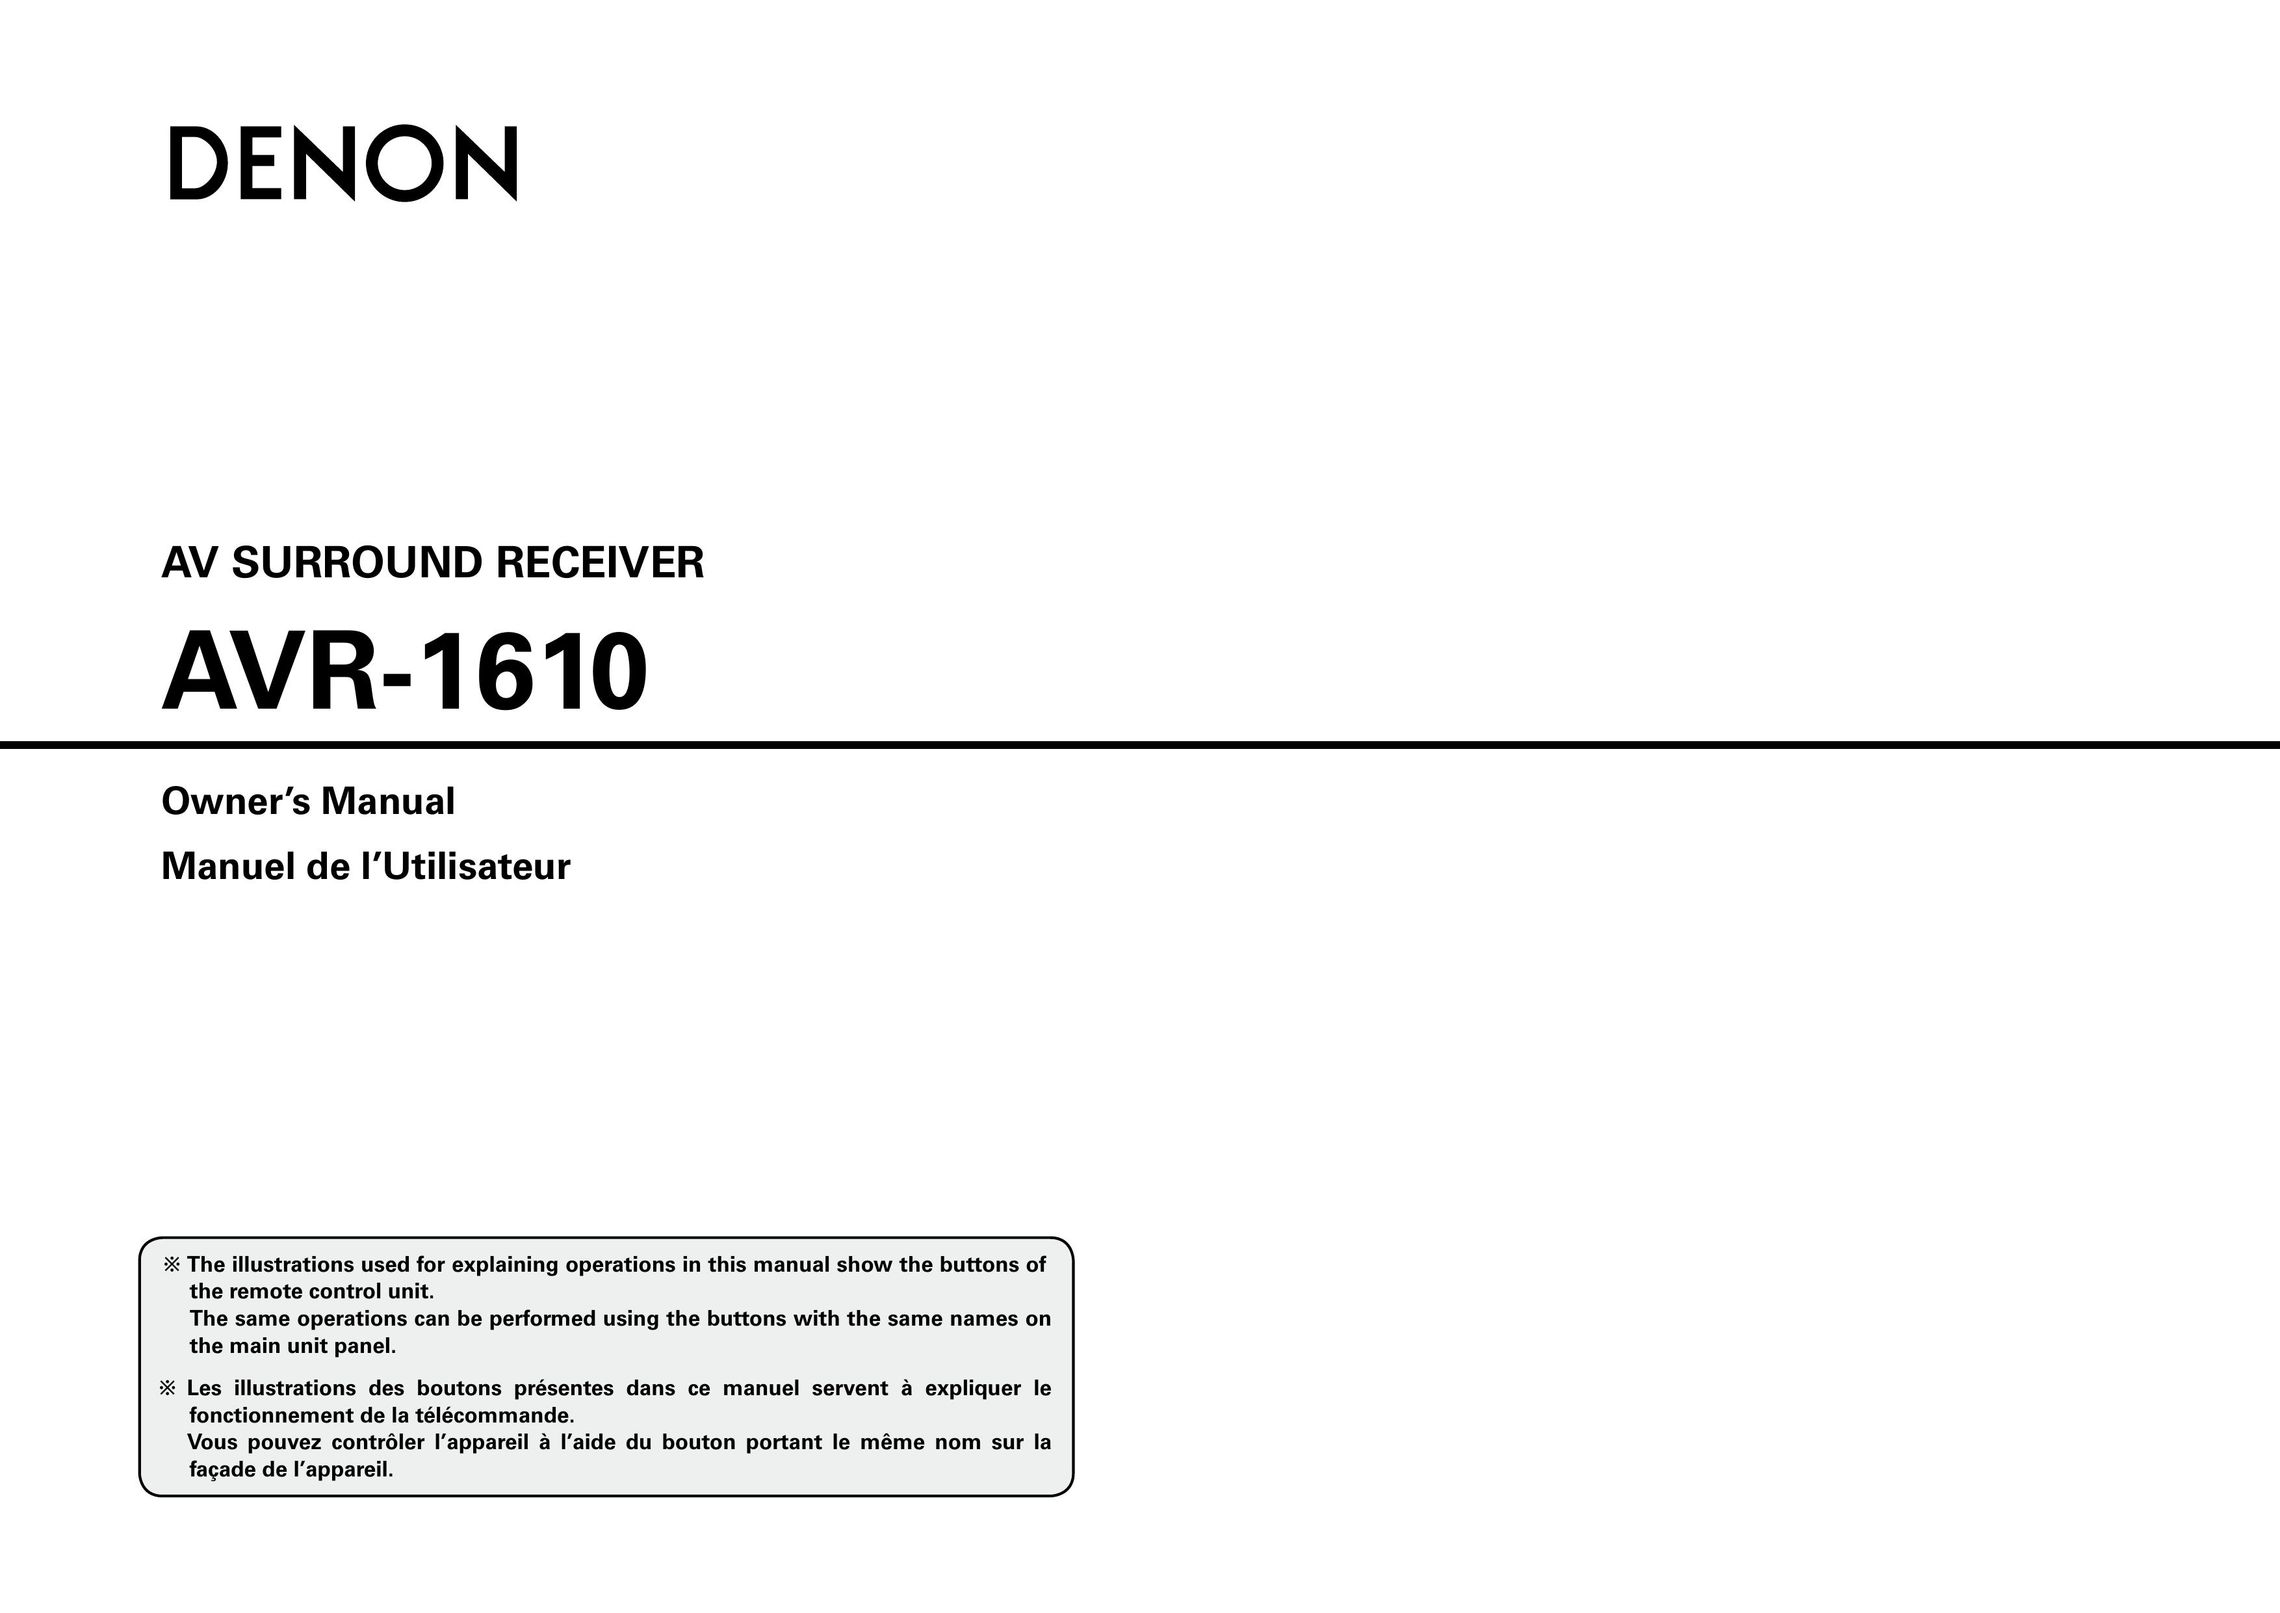 Denon AVR-1610 Home Theater System User Manual